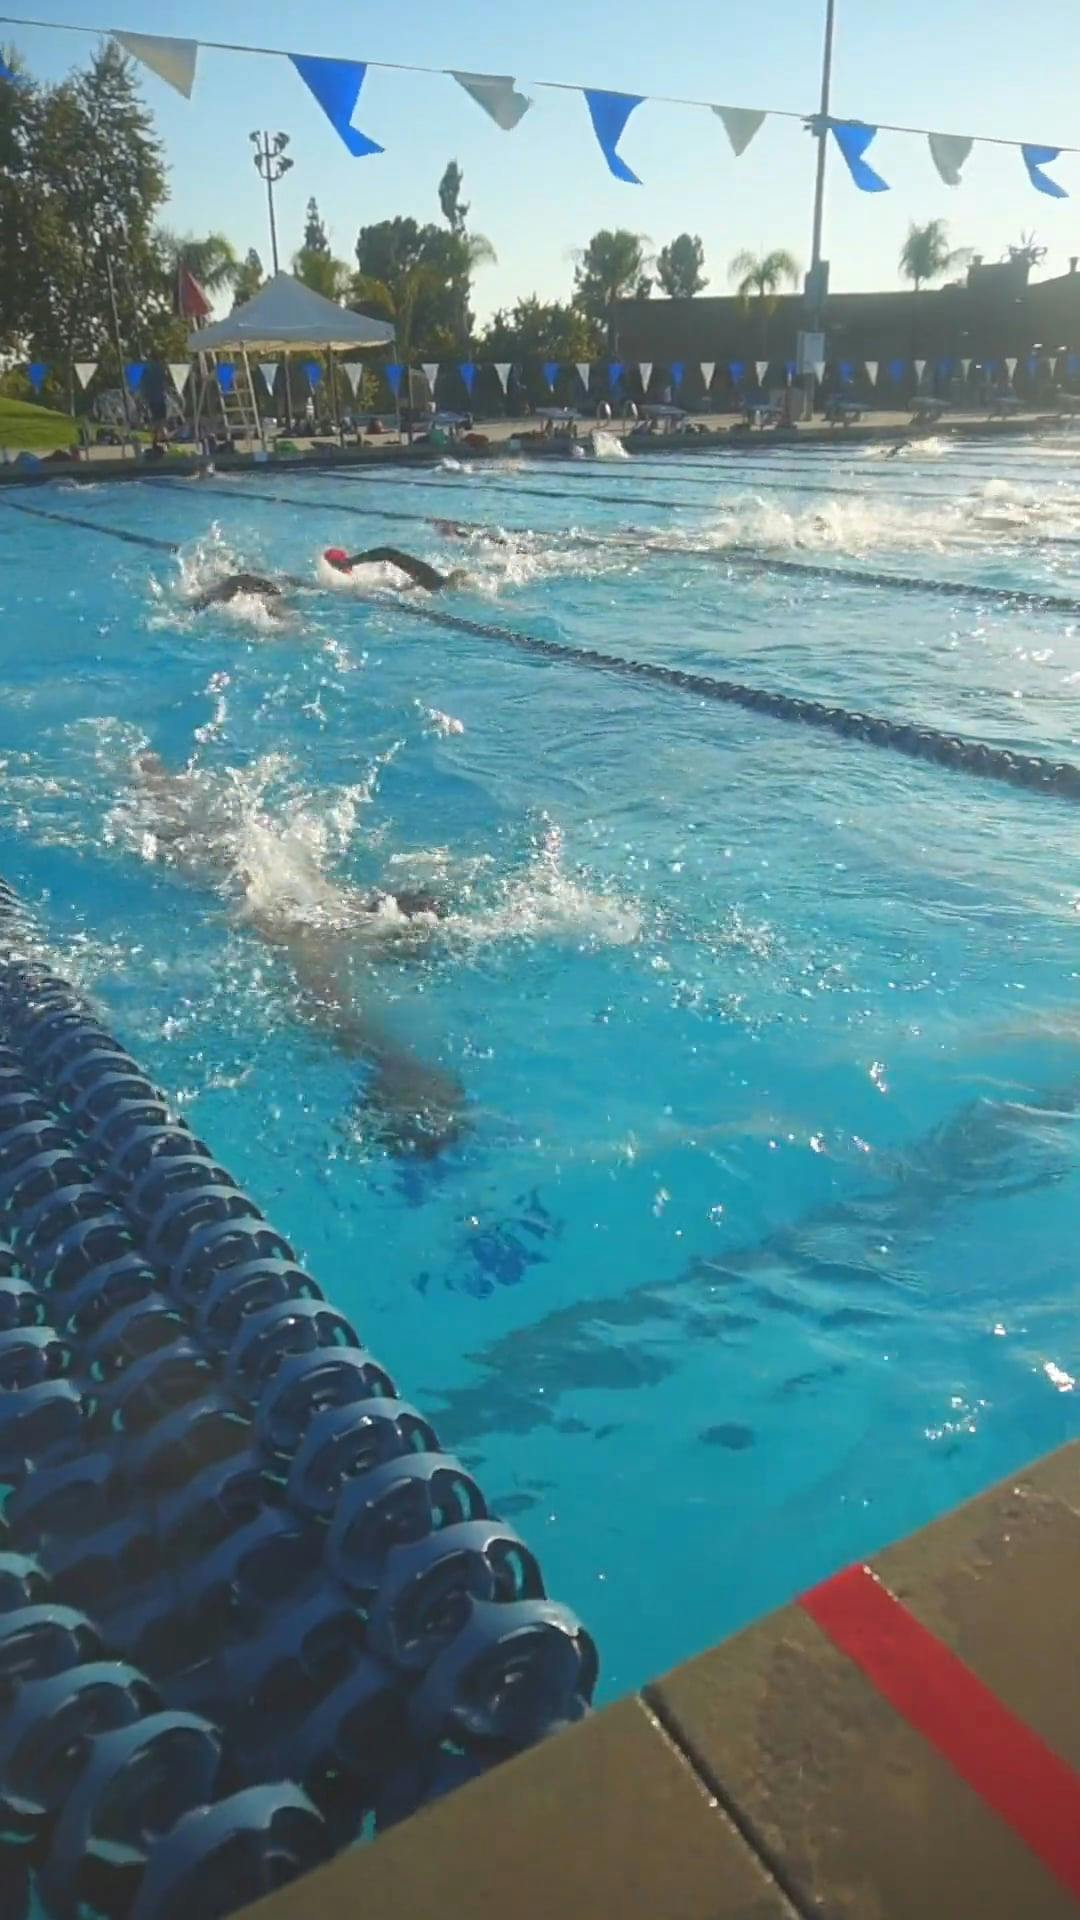 Slow Motion Video of Swimmers Training in a Pool · Free Stock Video